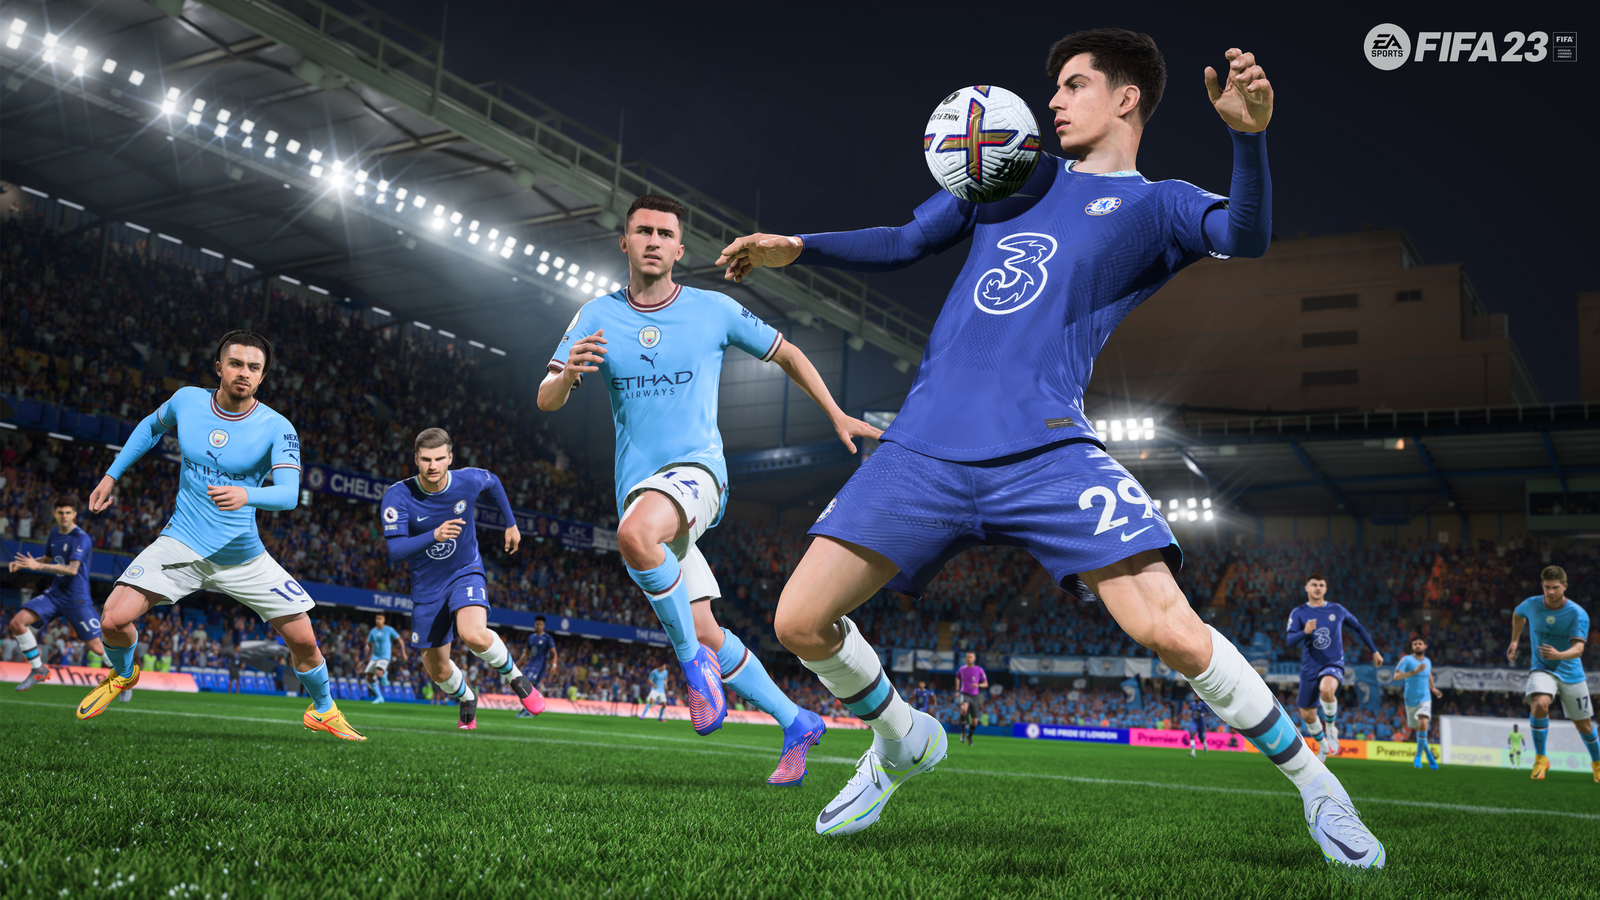 Finally! FIFA 23 on PC is the same as PS5 and Xbox Series X and S